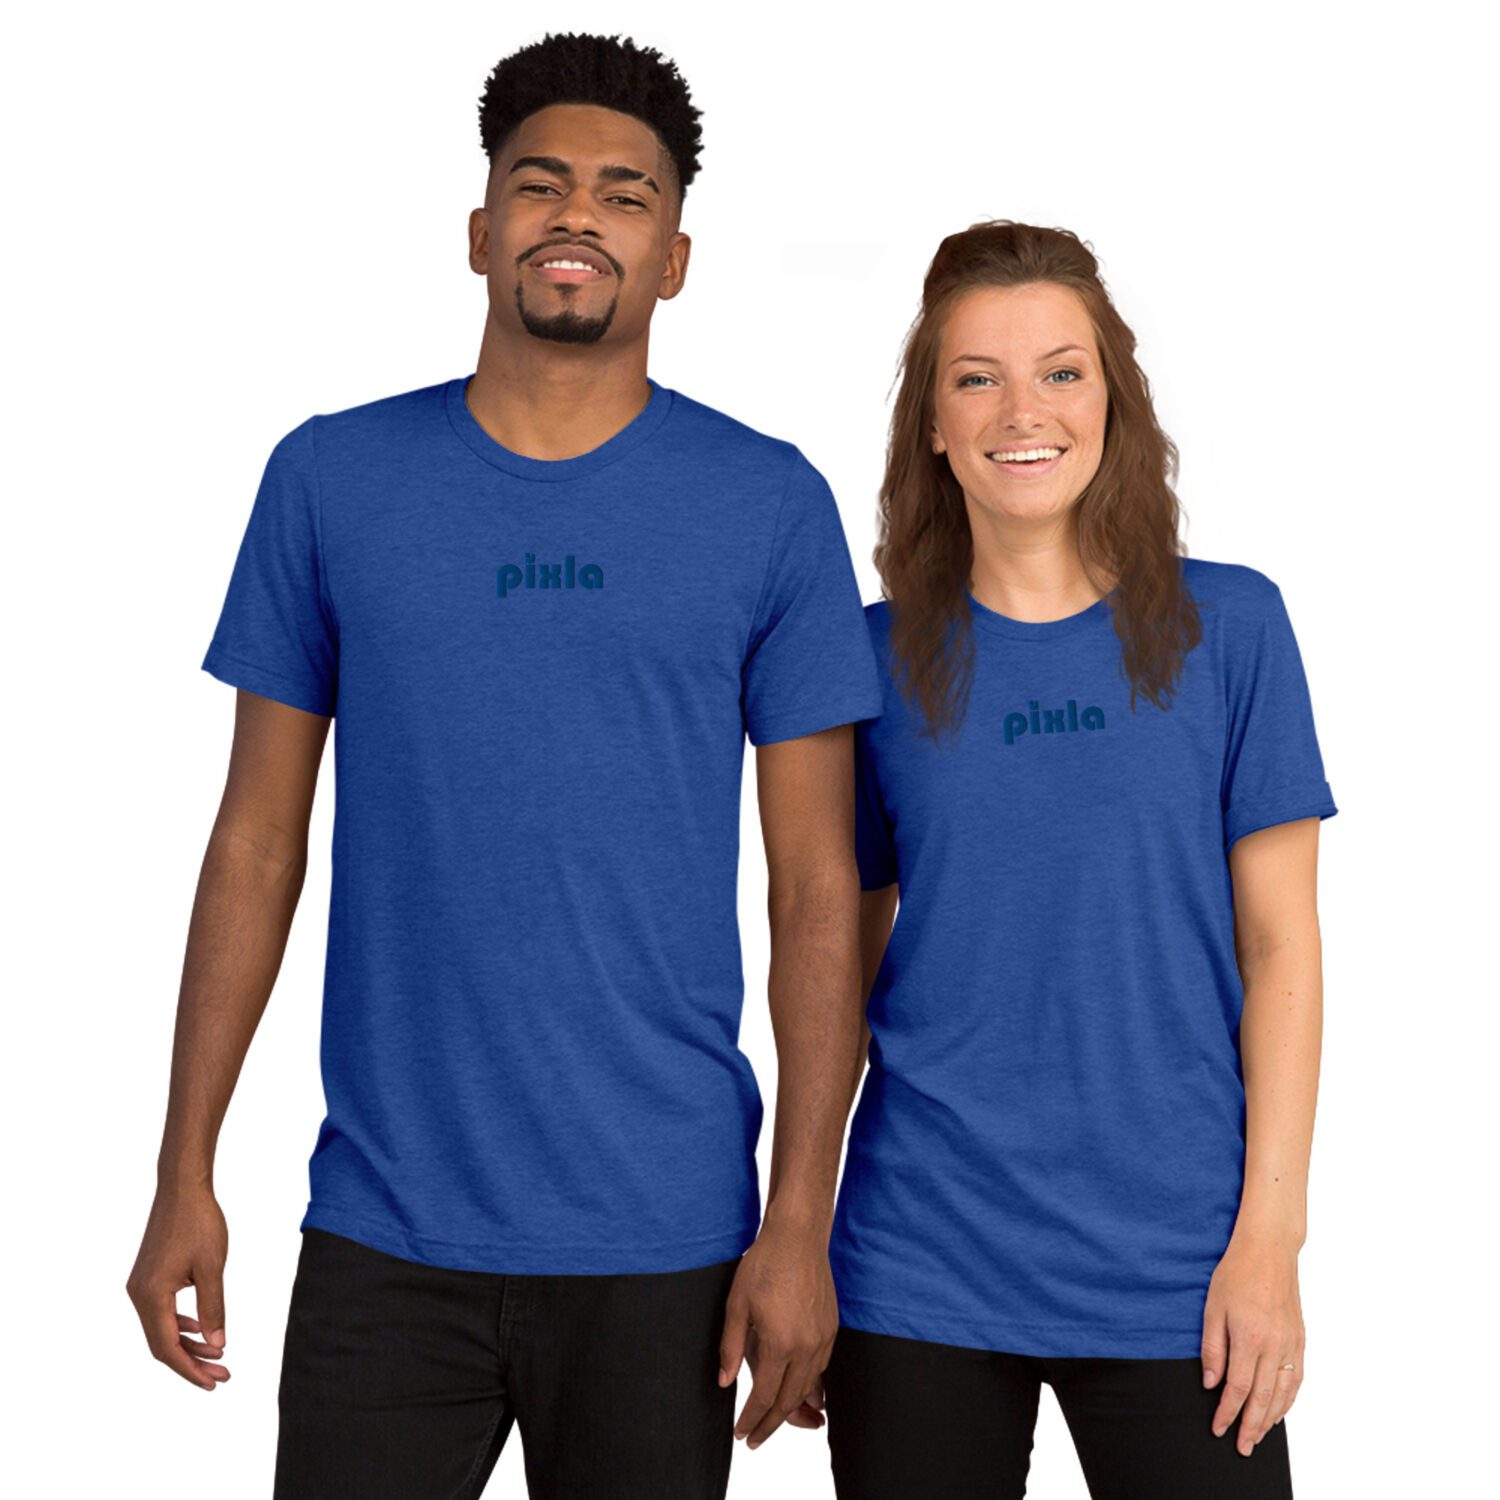 Soft and lightweight tri-blend fabric t-shirt in a vibrant electric royal blue. This royal blue shirt is comfortable and flattering and comes with tone-on-tone embroidery on the chest.